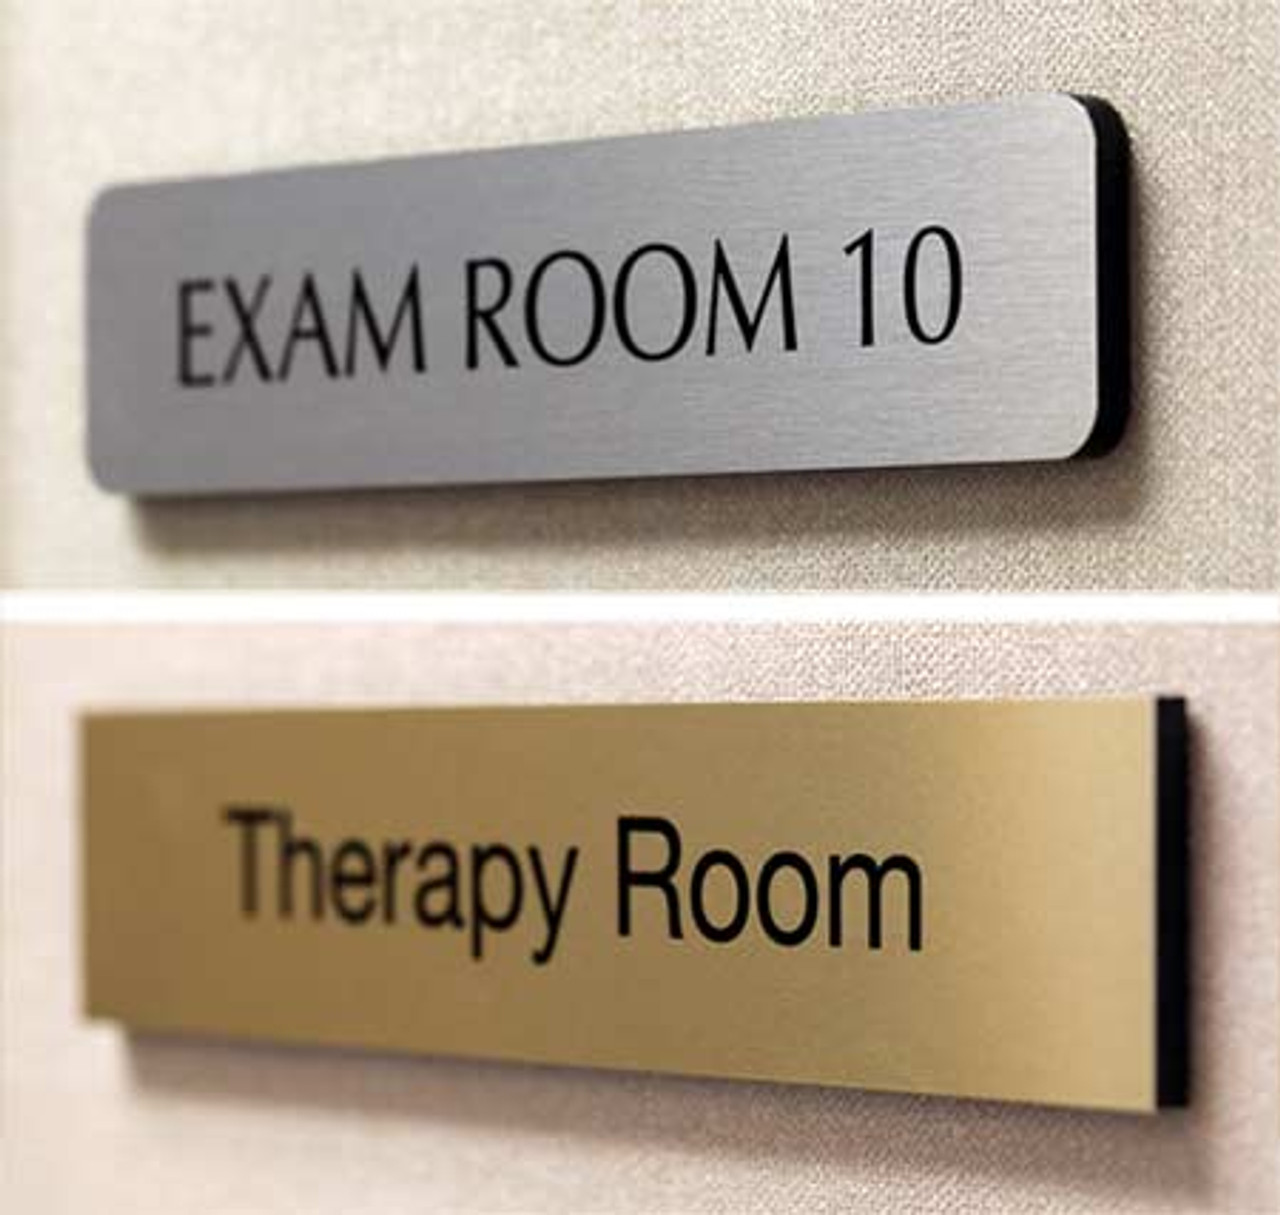 Administrative Office Door Sign. Clearly label every room in your